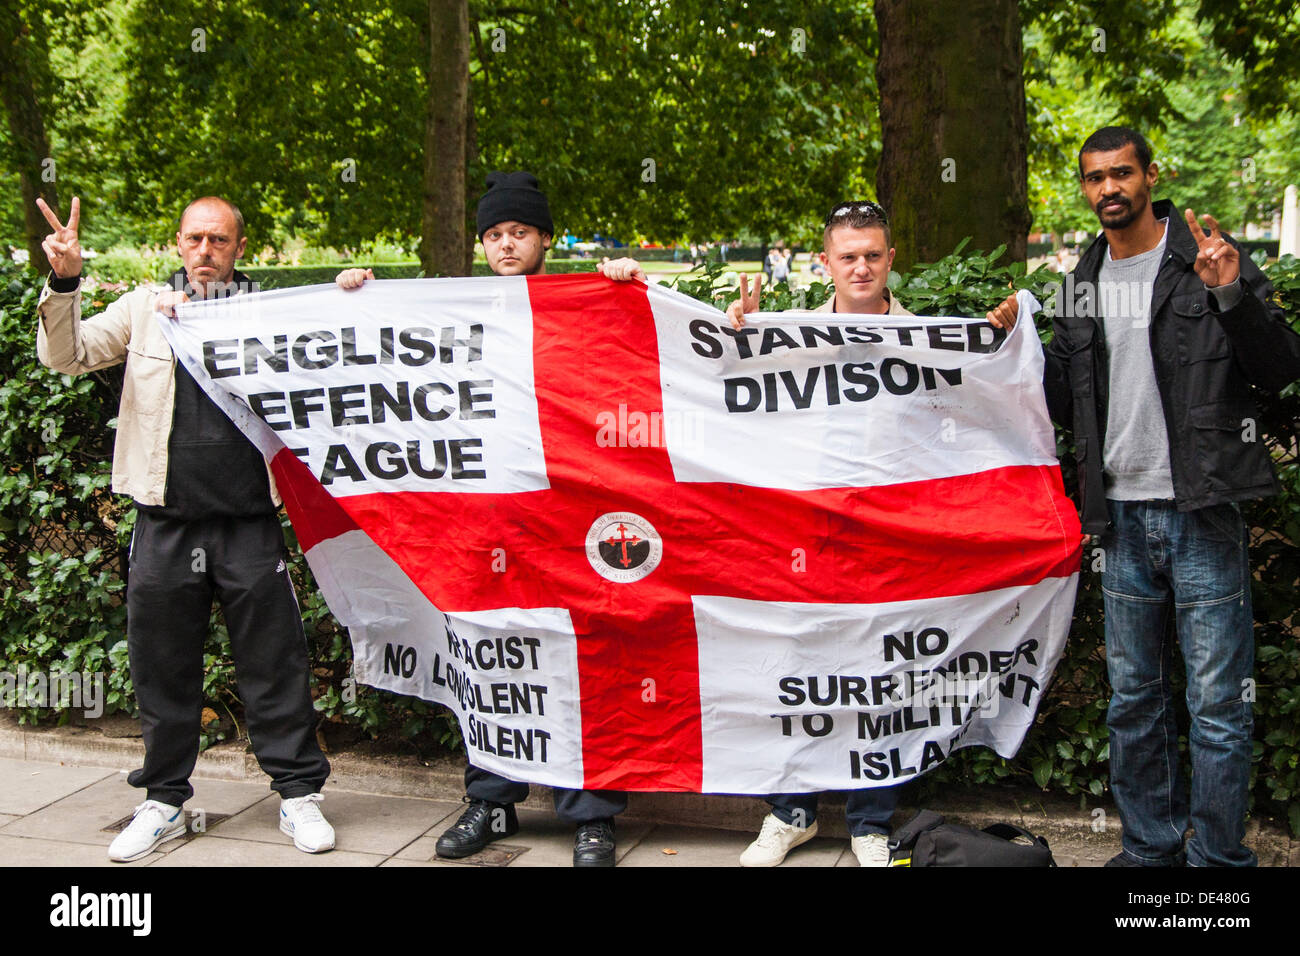 Grosvenor Square, London, UK. 11th Sep, 2013. English Defence League activists including their leader Tommy Robinson, second from right, pose for pictures after laying flowers at the 9/11 memorial in Grosvenor Square, London on the anniversary of the terrorist attacks on America. Credit:  Paul Davey/Alamy Live News Stock Photo